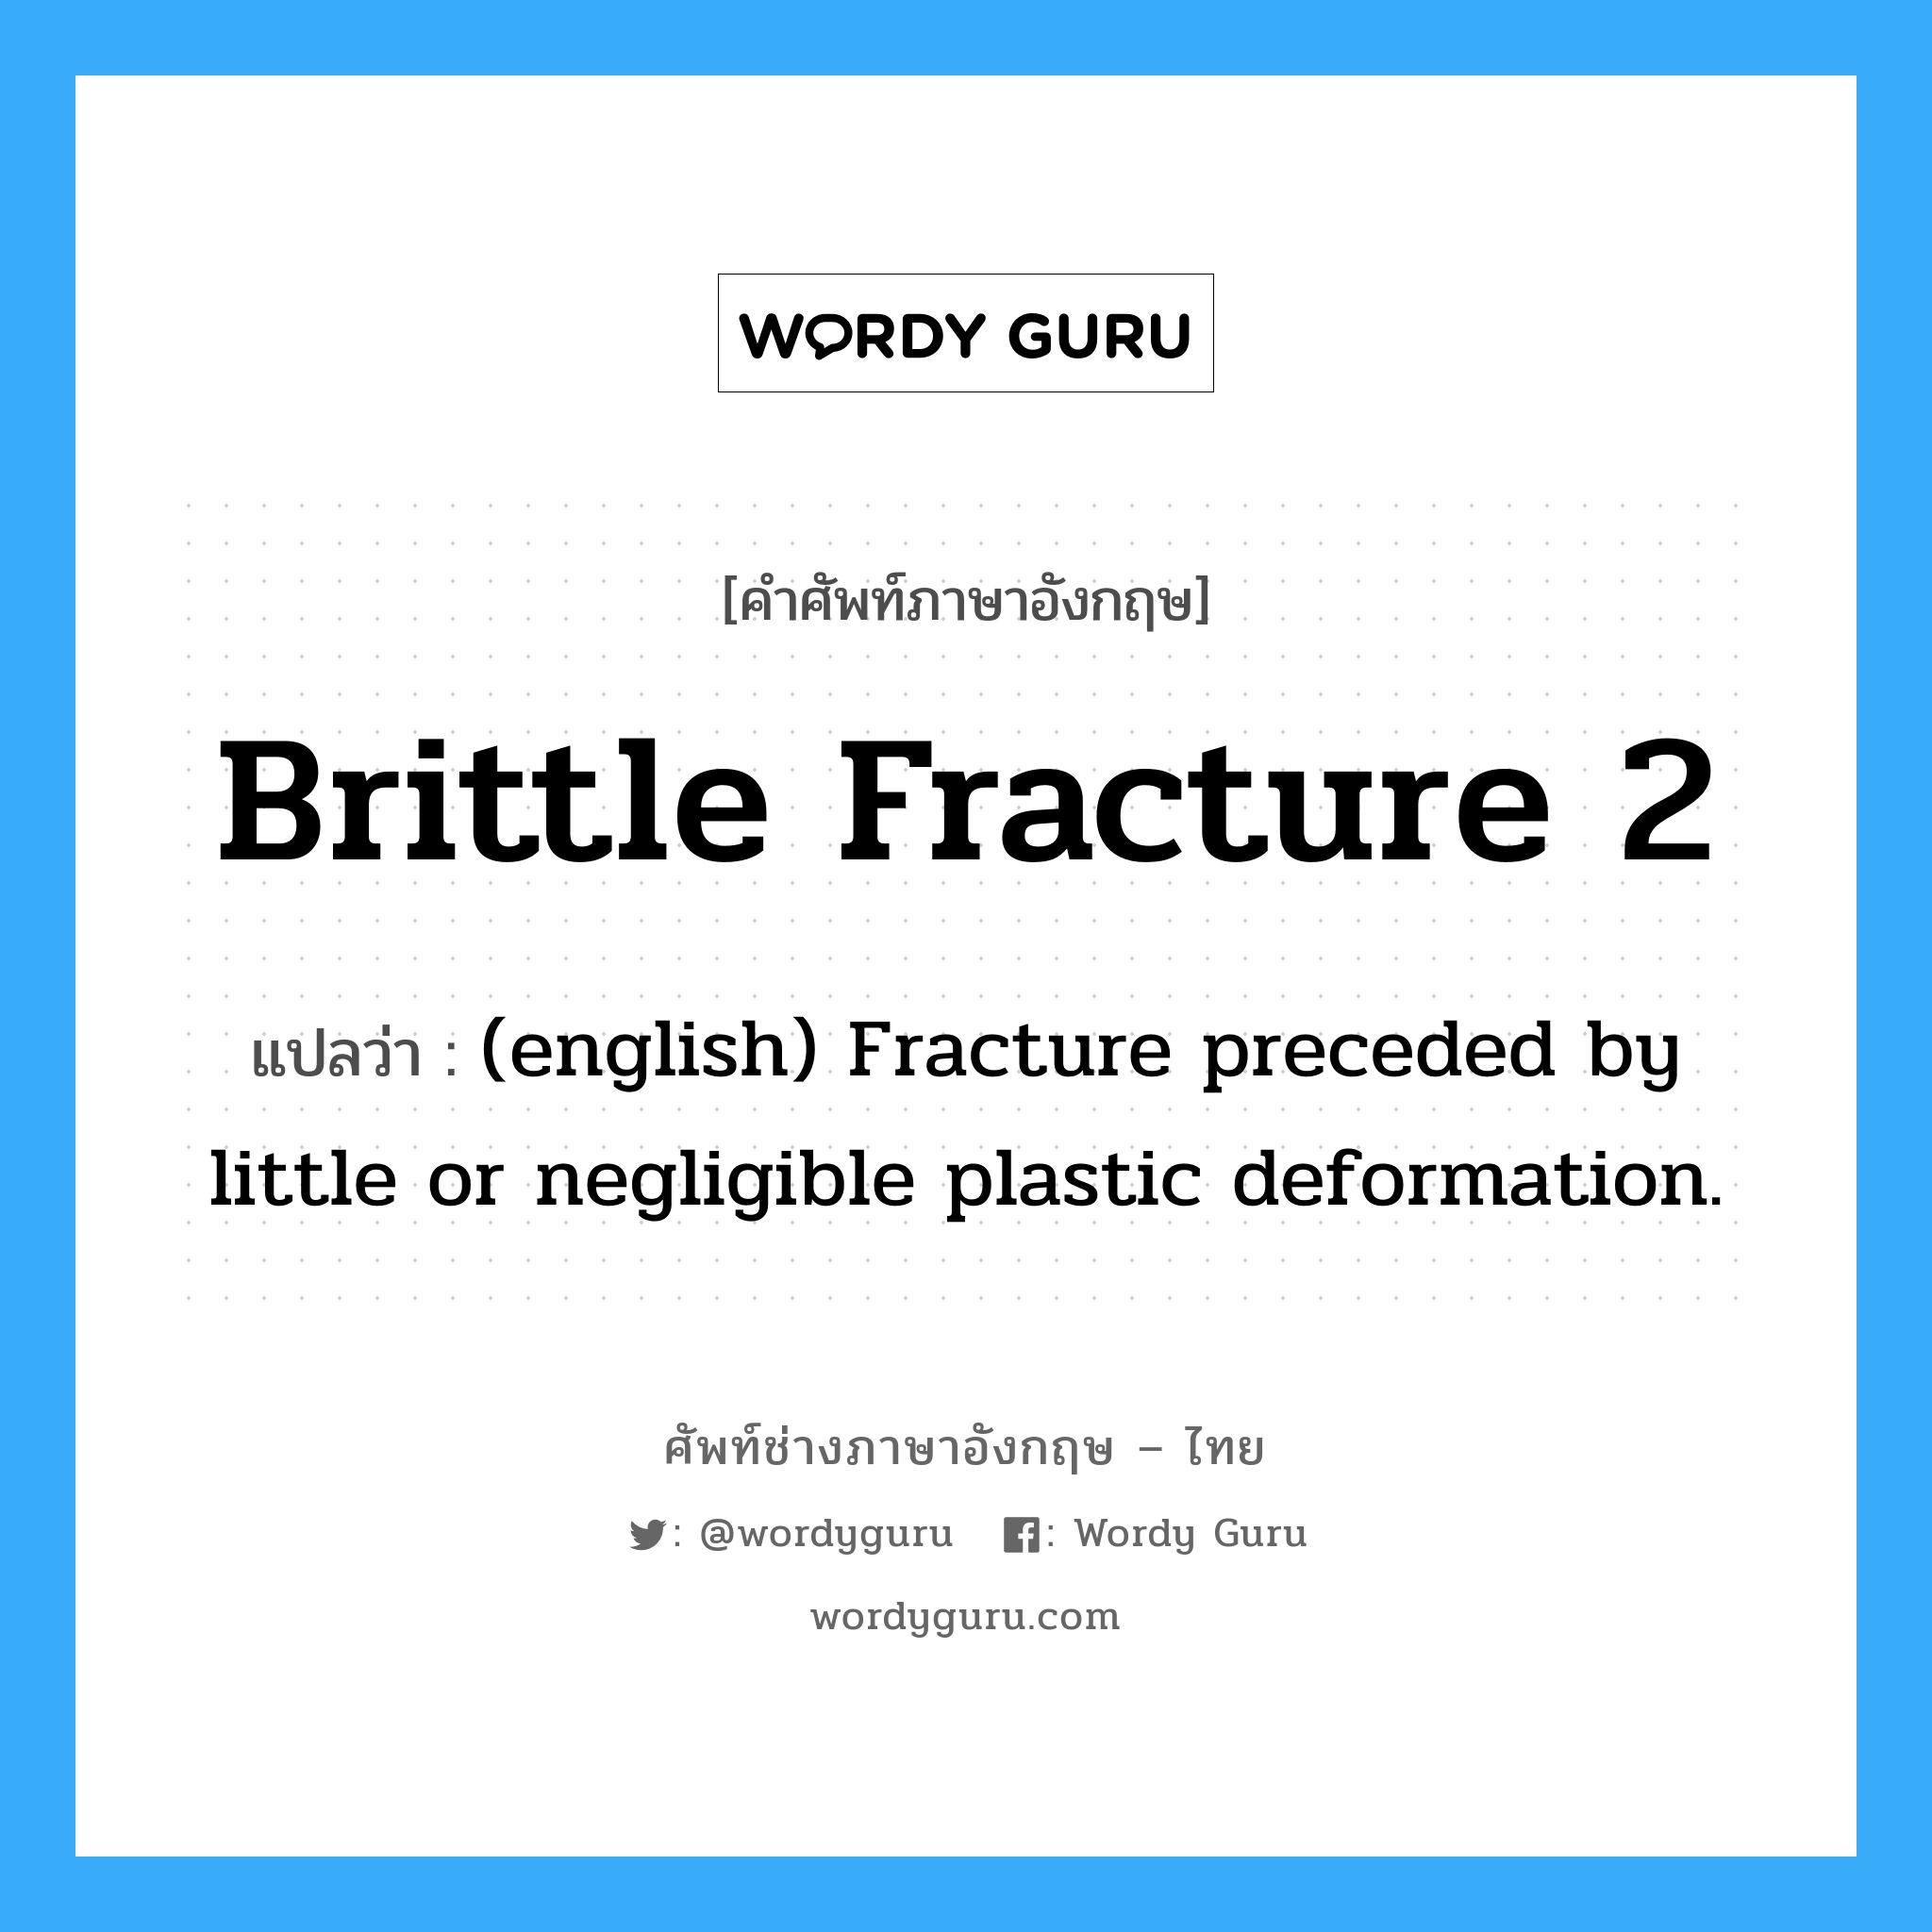 (english) Fracture preceded by little or negligible plastic deformation. ภาษาอังกฤษ?, คำศัพท์ช่างภาษาอังกฤษ - ไทย (english) Fracture preceded by little or negligible plastic deformation. คำศัพท์ภาษาอังกฤษ (english) Fracture preceded by little or negligible plastic deformation. แปลว่า Brittle Fracture 2